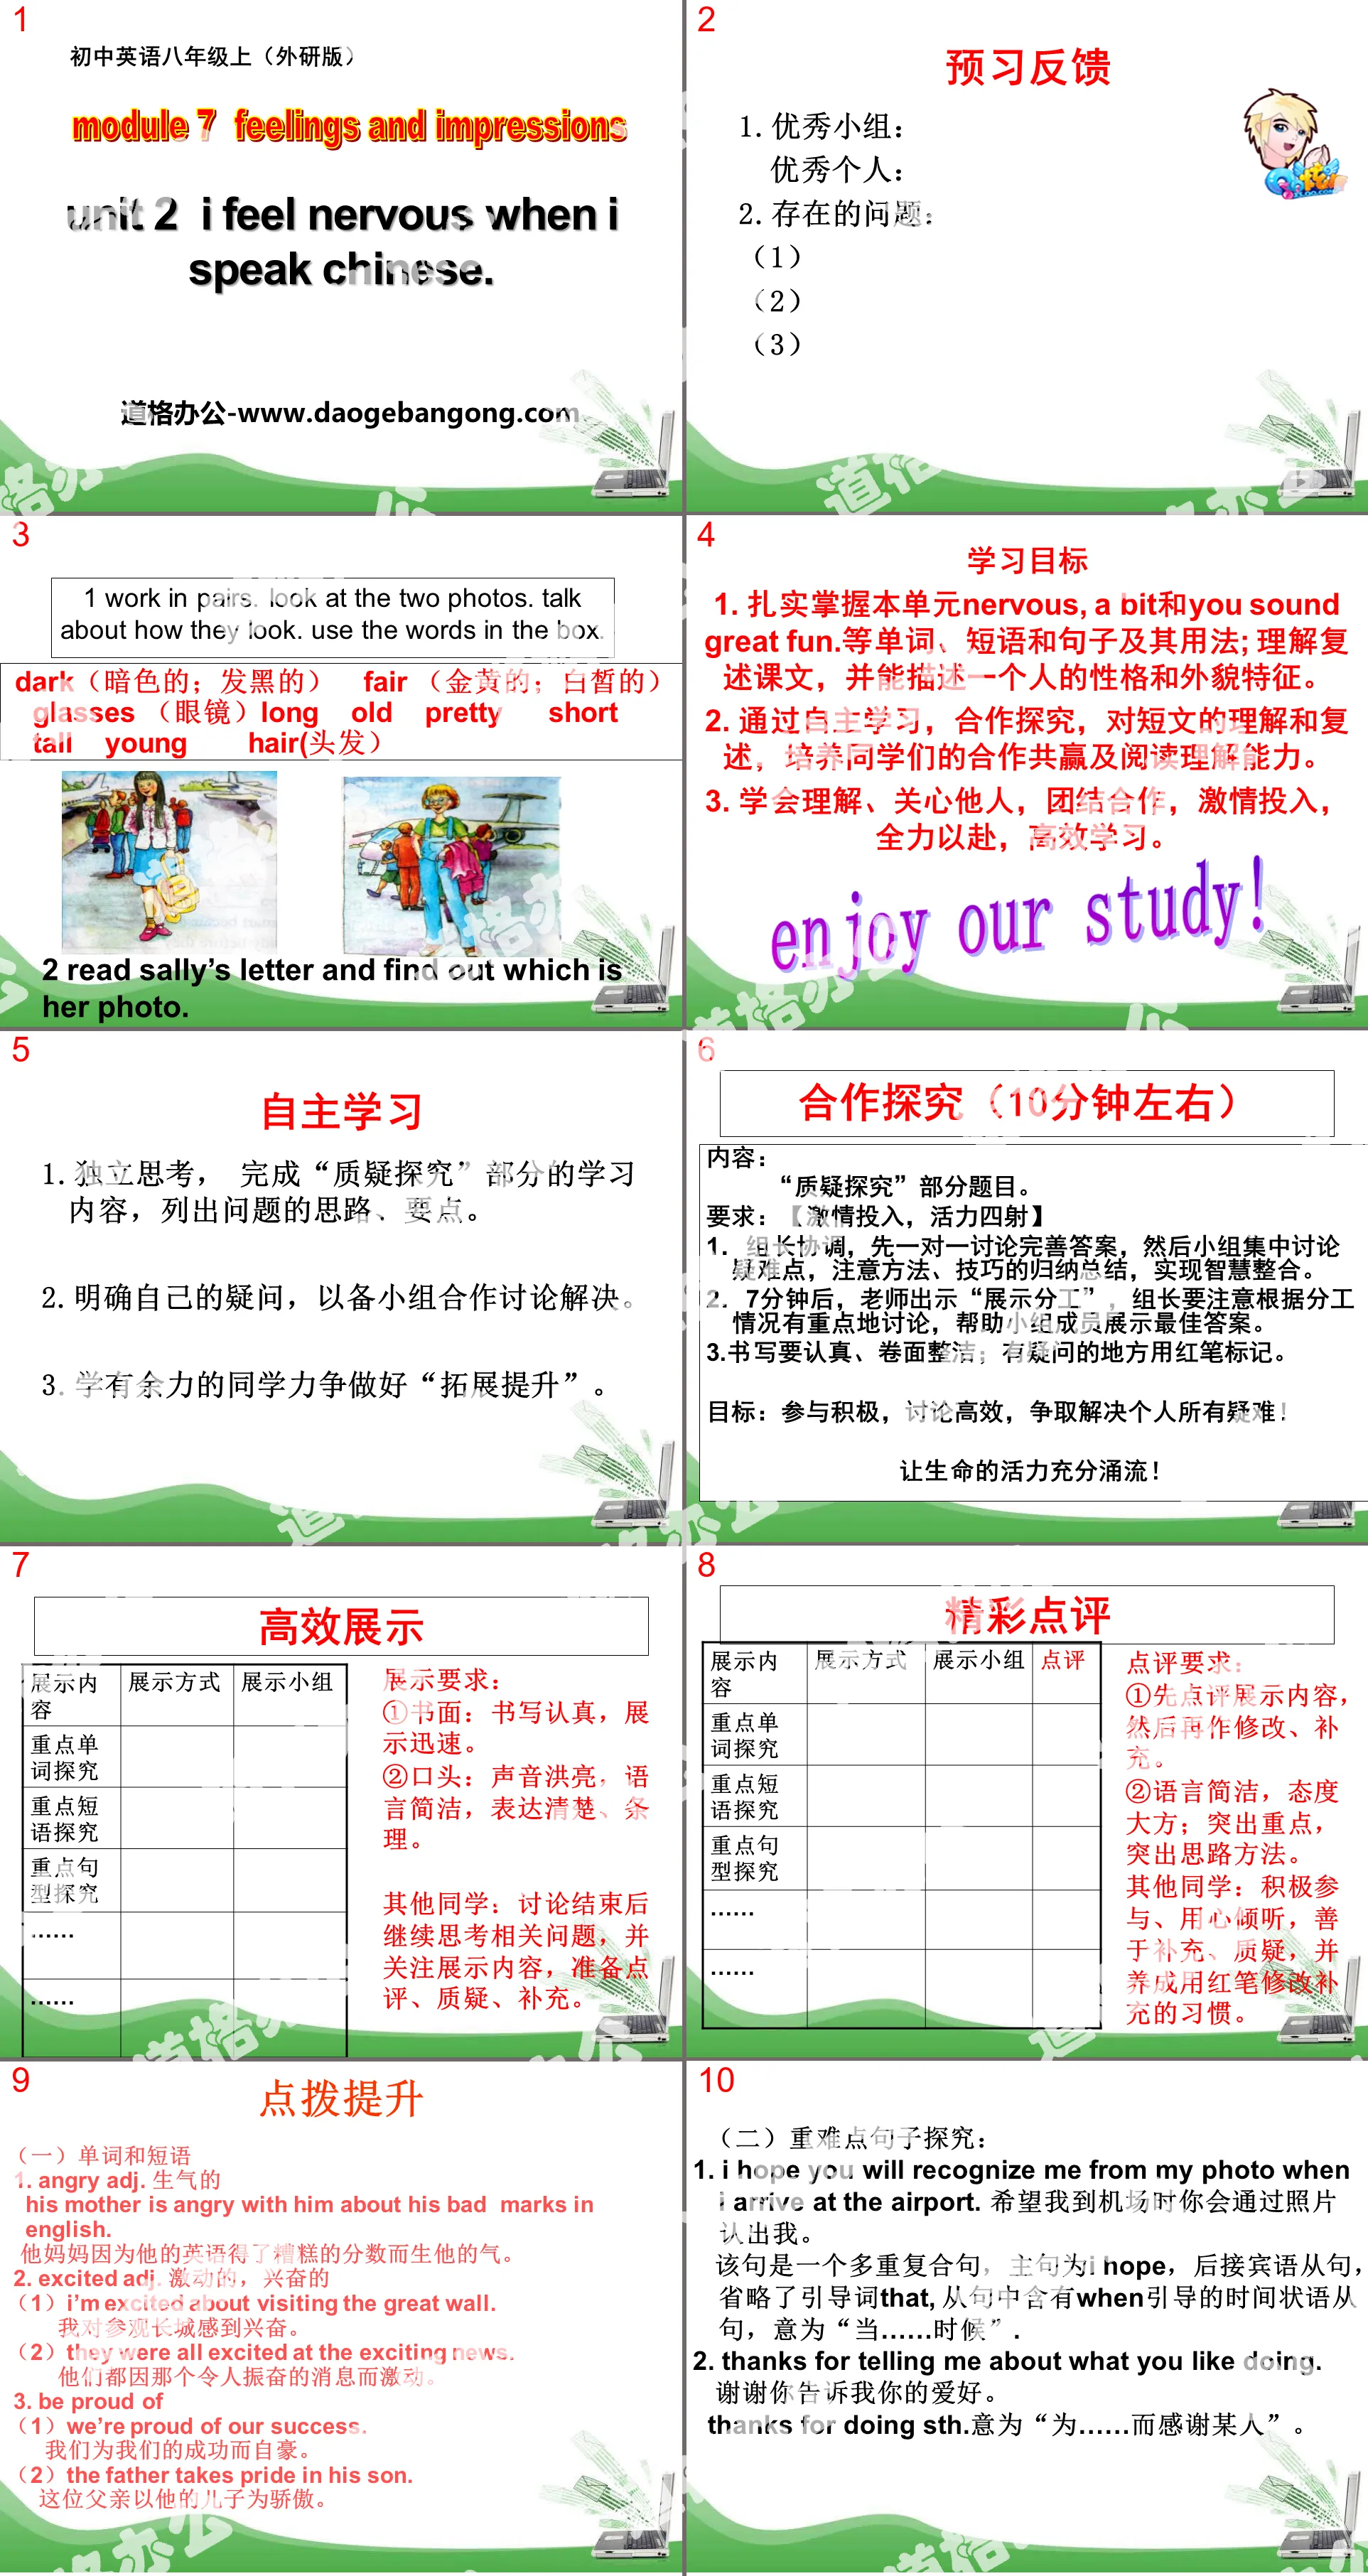 "I feel nervous when I speak Chinese" Feelings and impressions PPT courseware 3